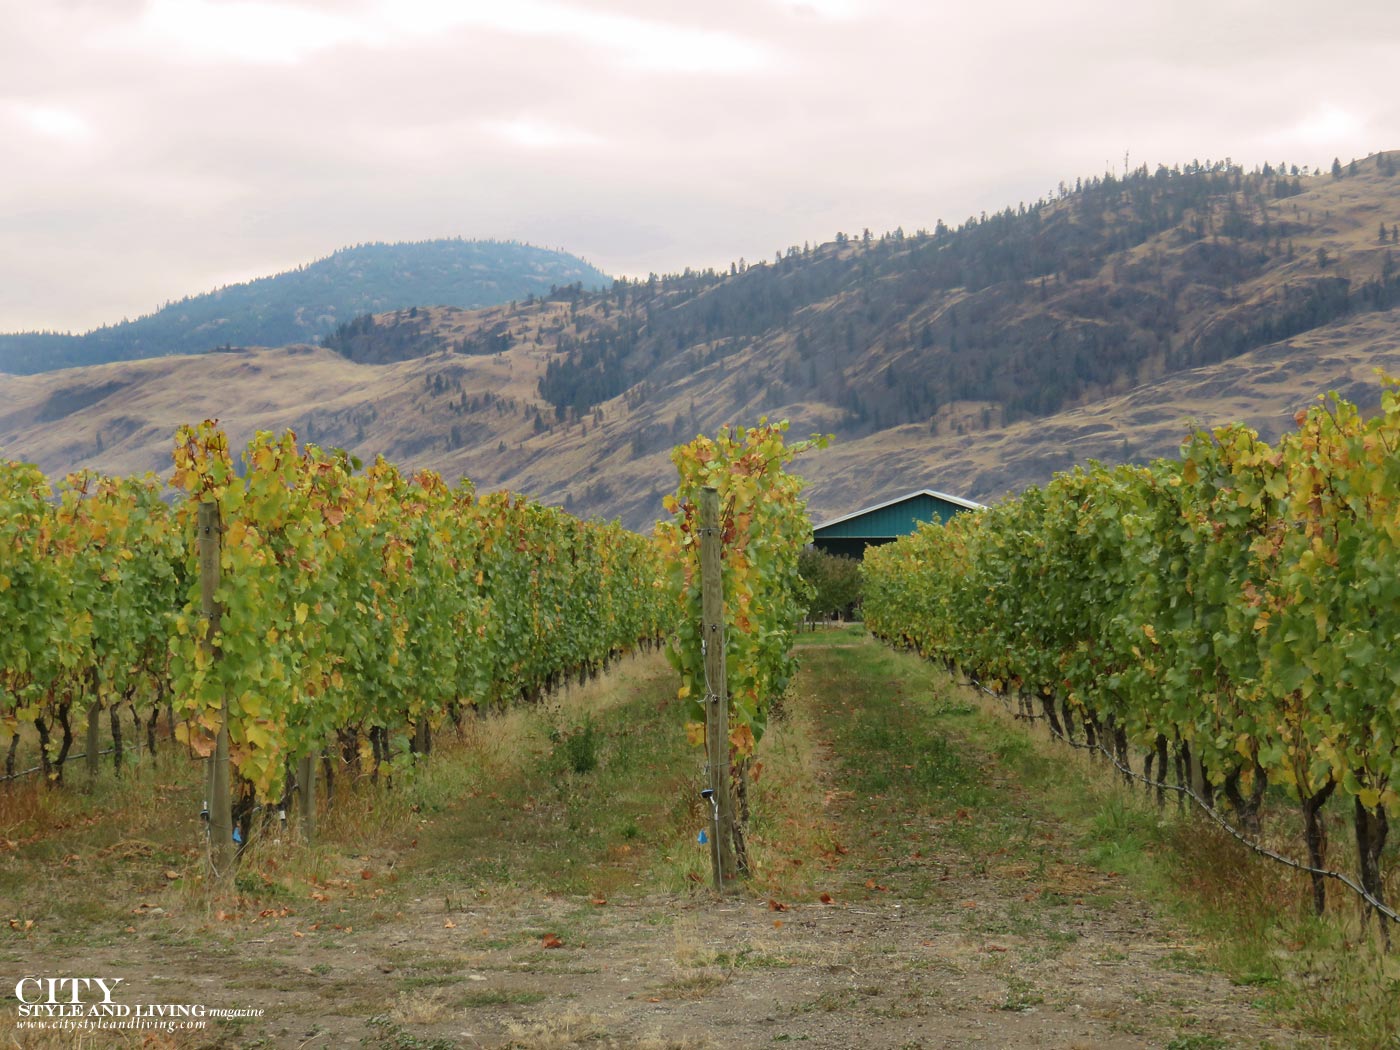 City Style and Living Magazine Bartier Brothers Vineyard during fall in The Okanagan before harvest